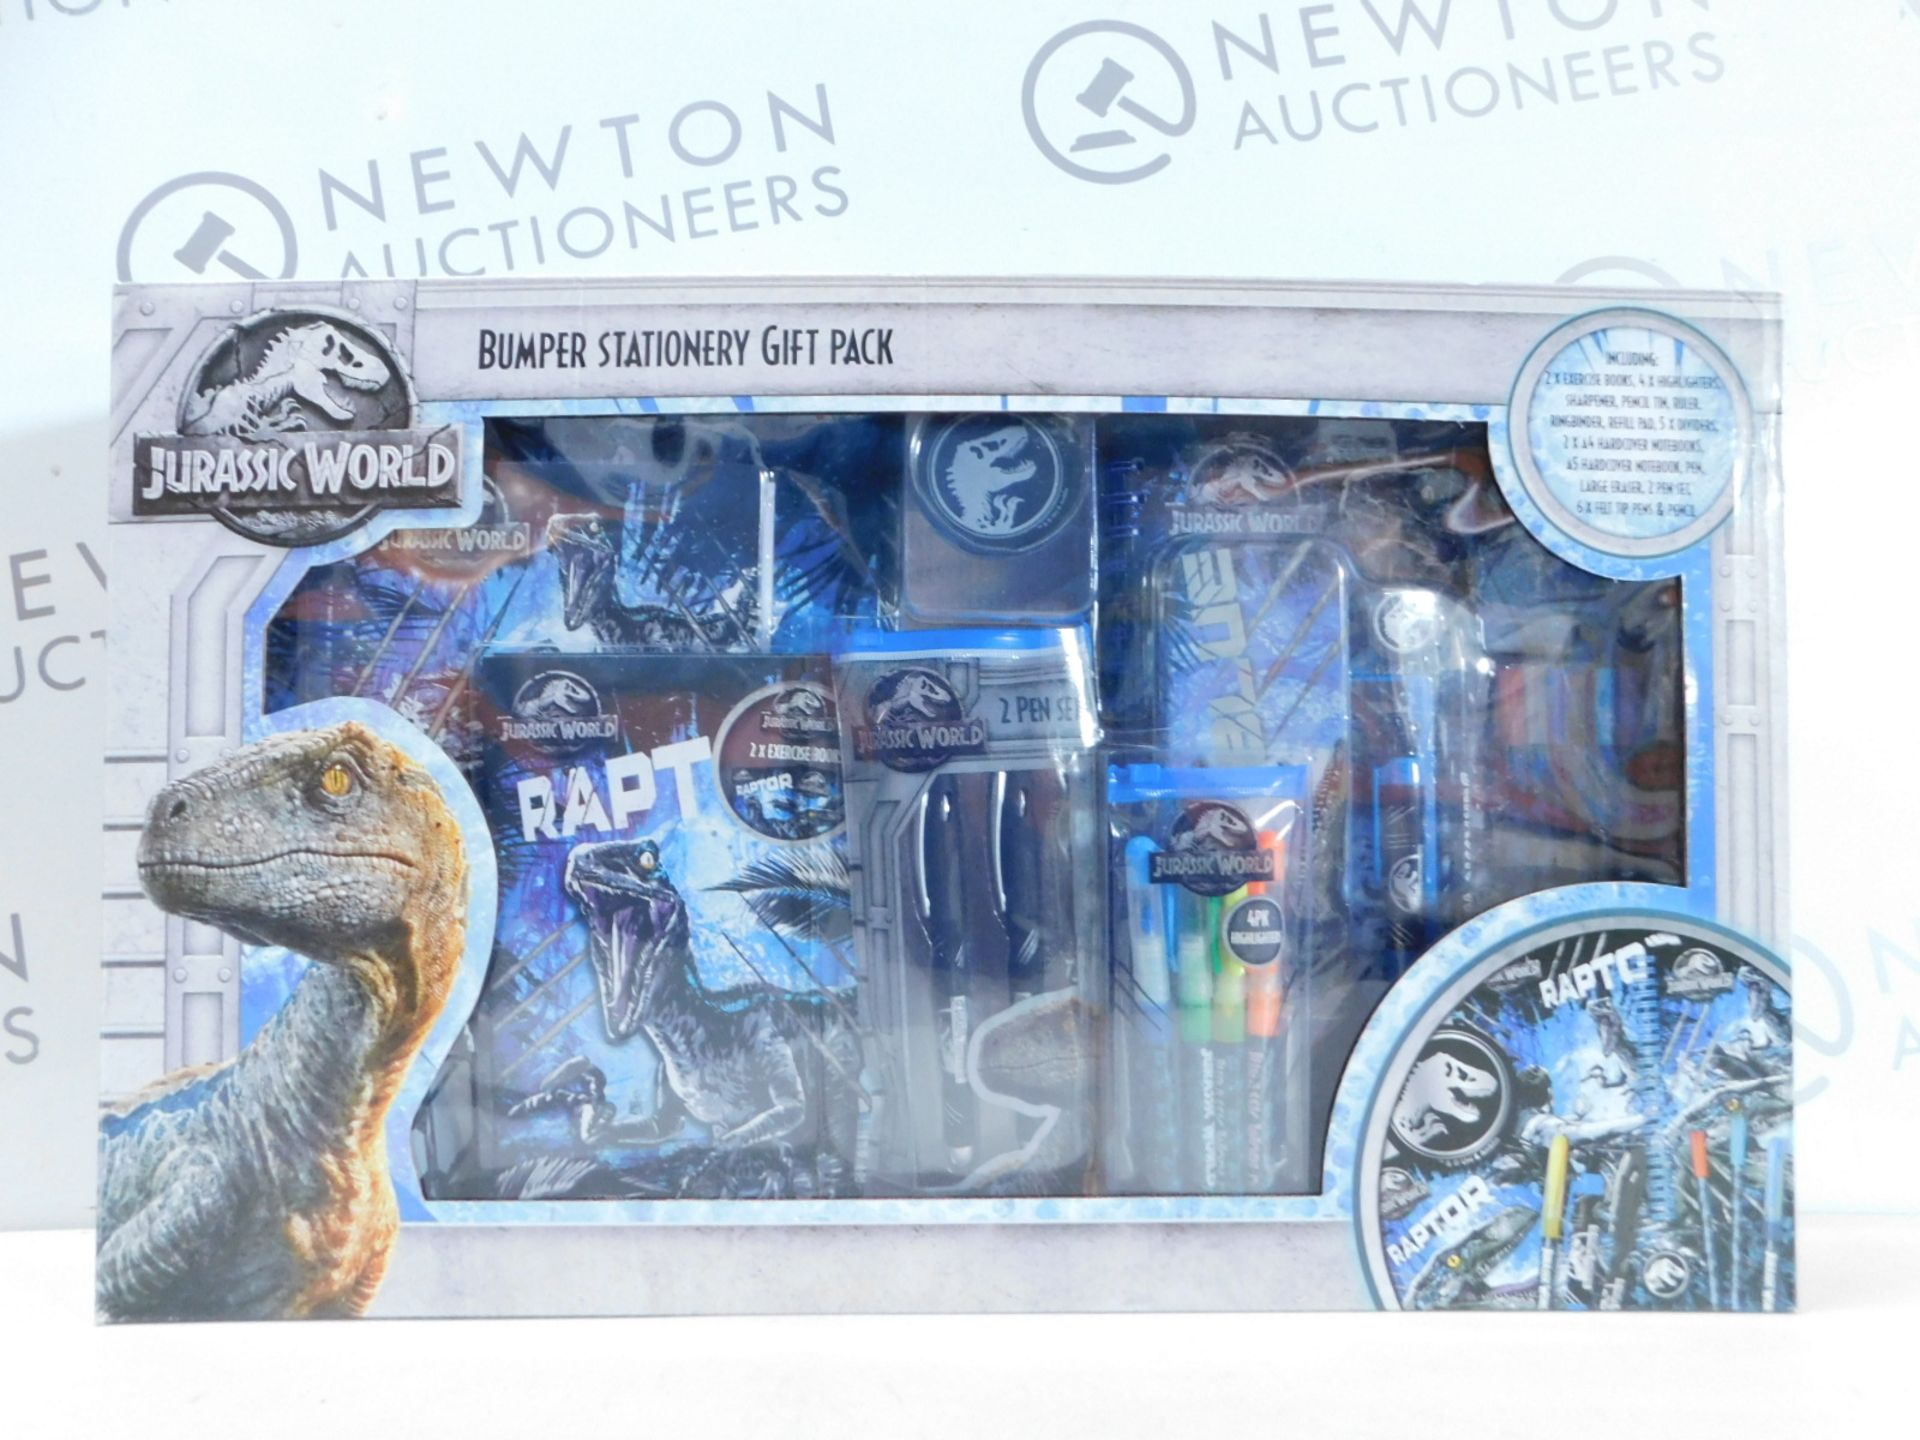 1 BRAND NEW BOXED JURASSIC WORLD BUMPER STATIONERY GIFT PACK RRP £29.99